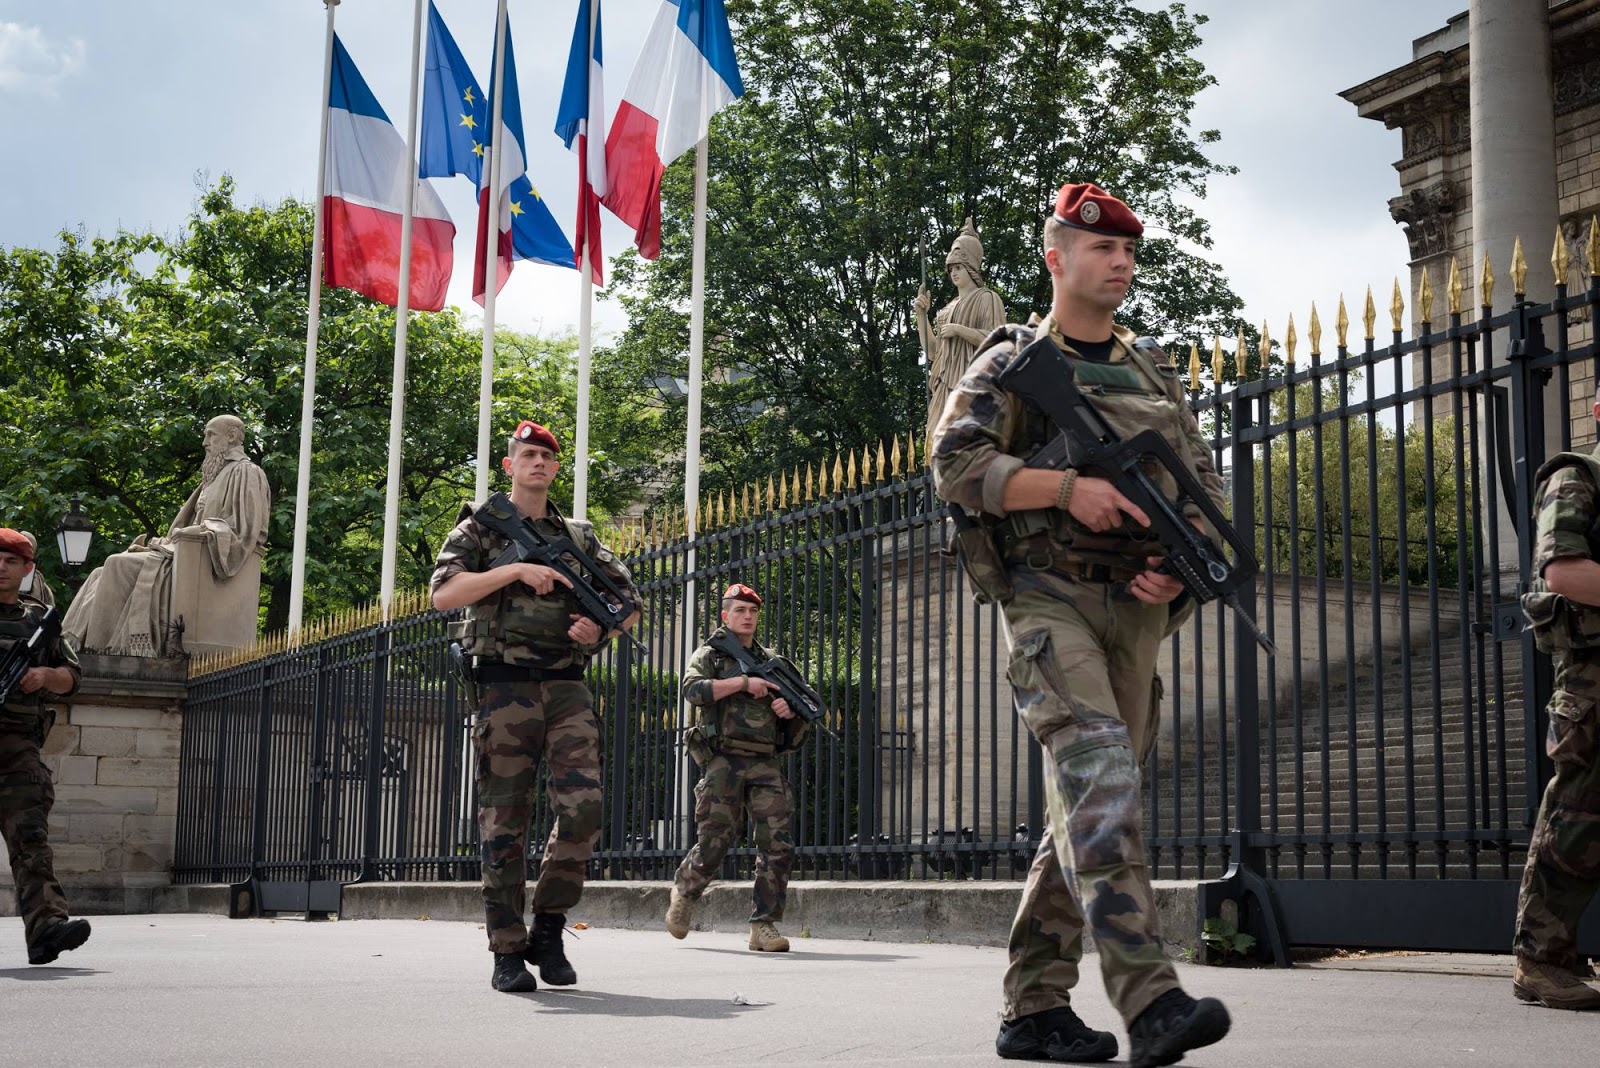 You are currently viewing Actu nationale: Sécurité nationale : le courage s’impose #France